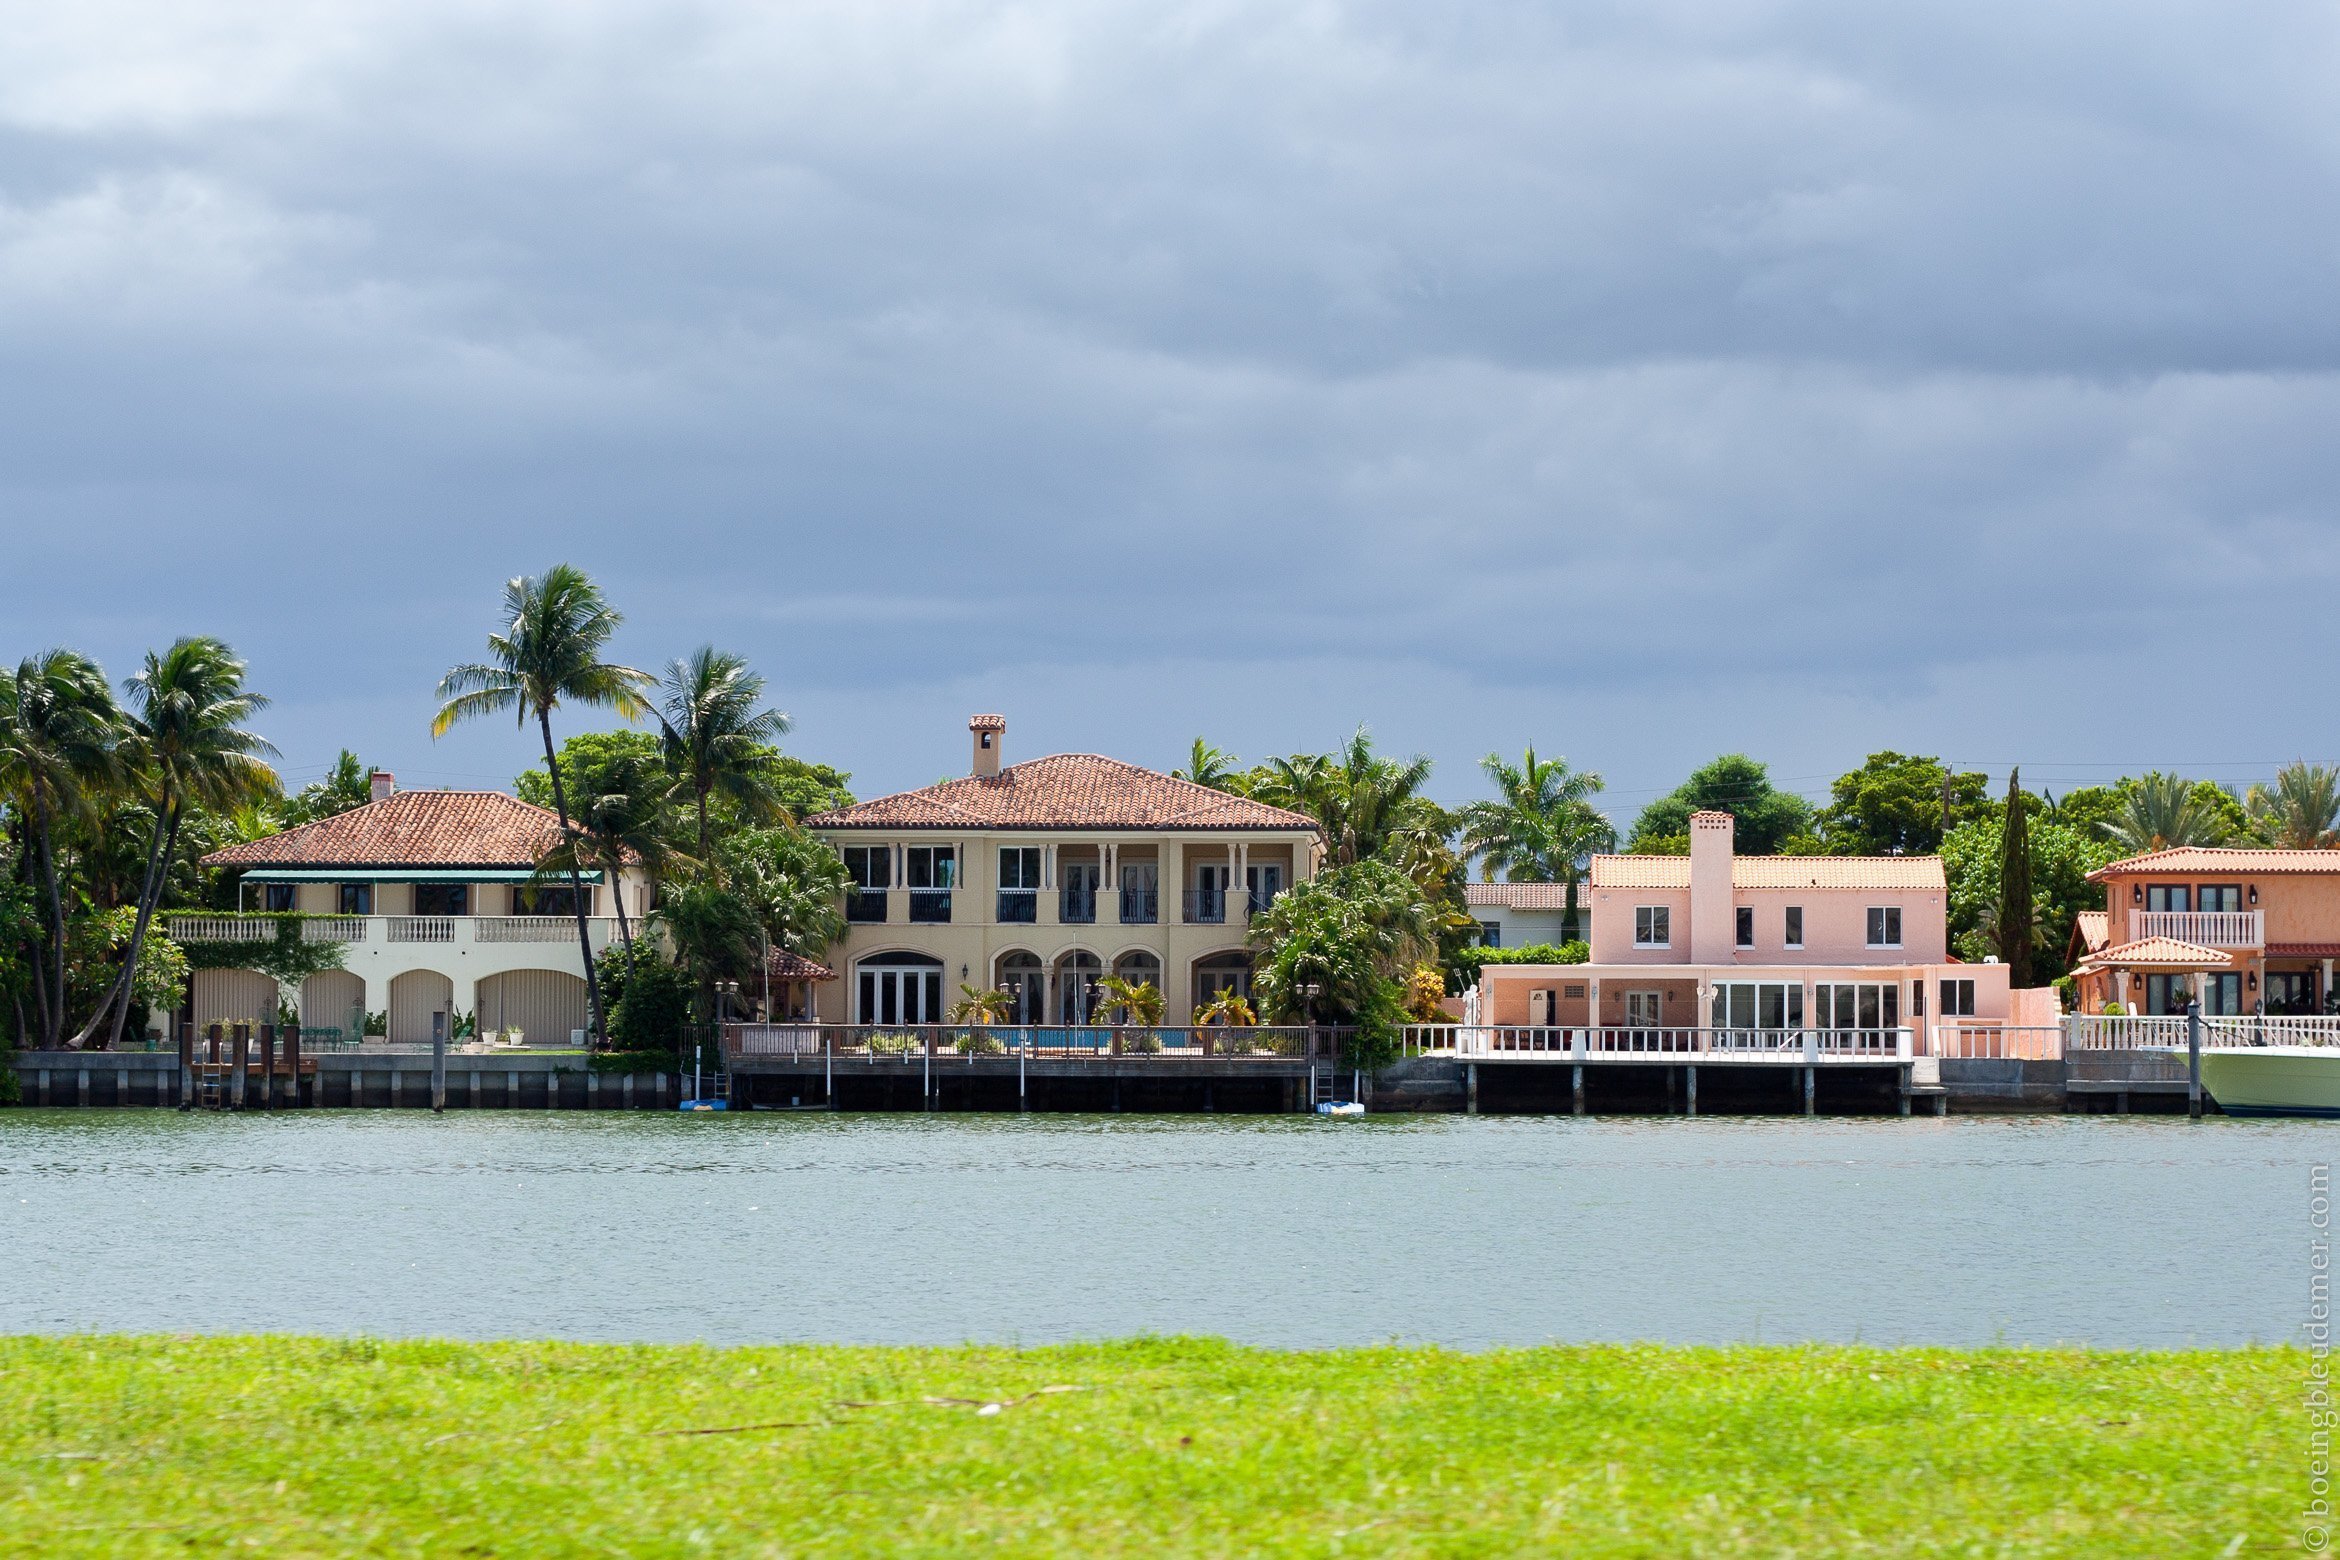 Floridian mansions